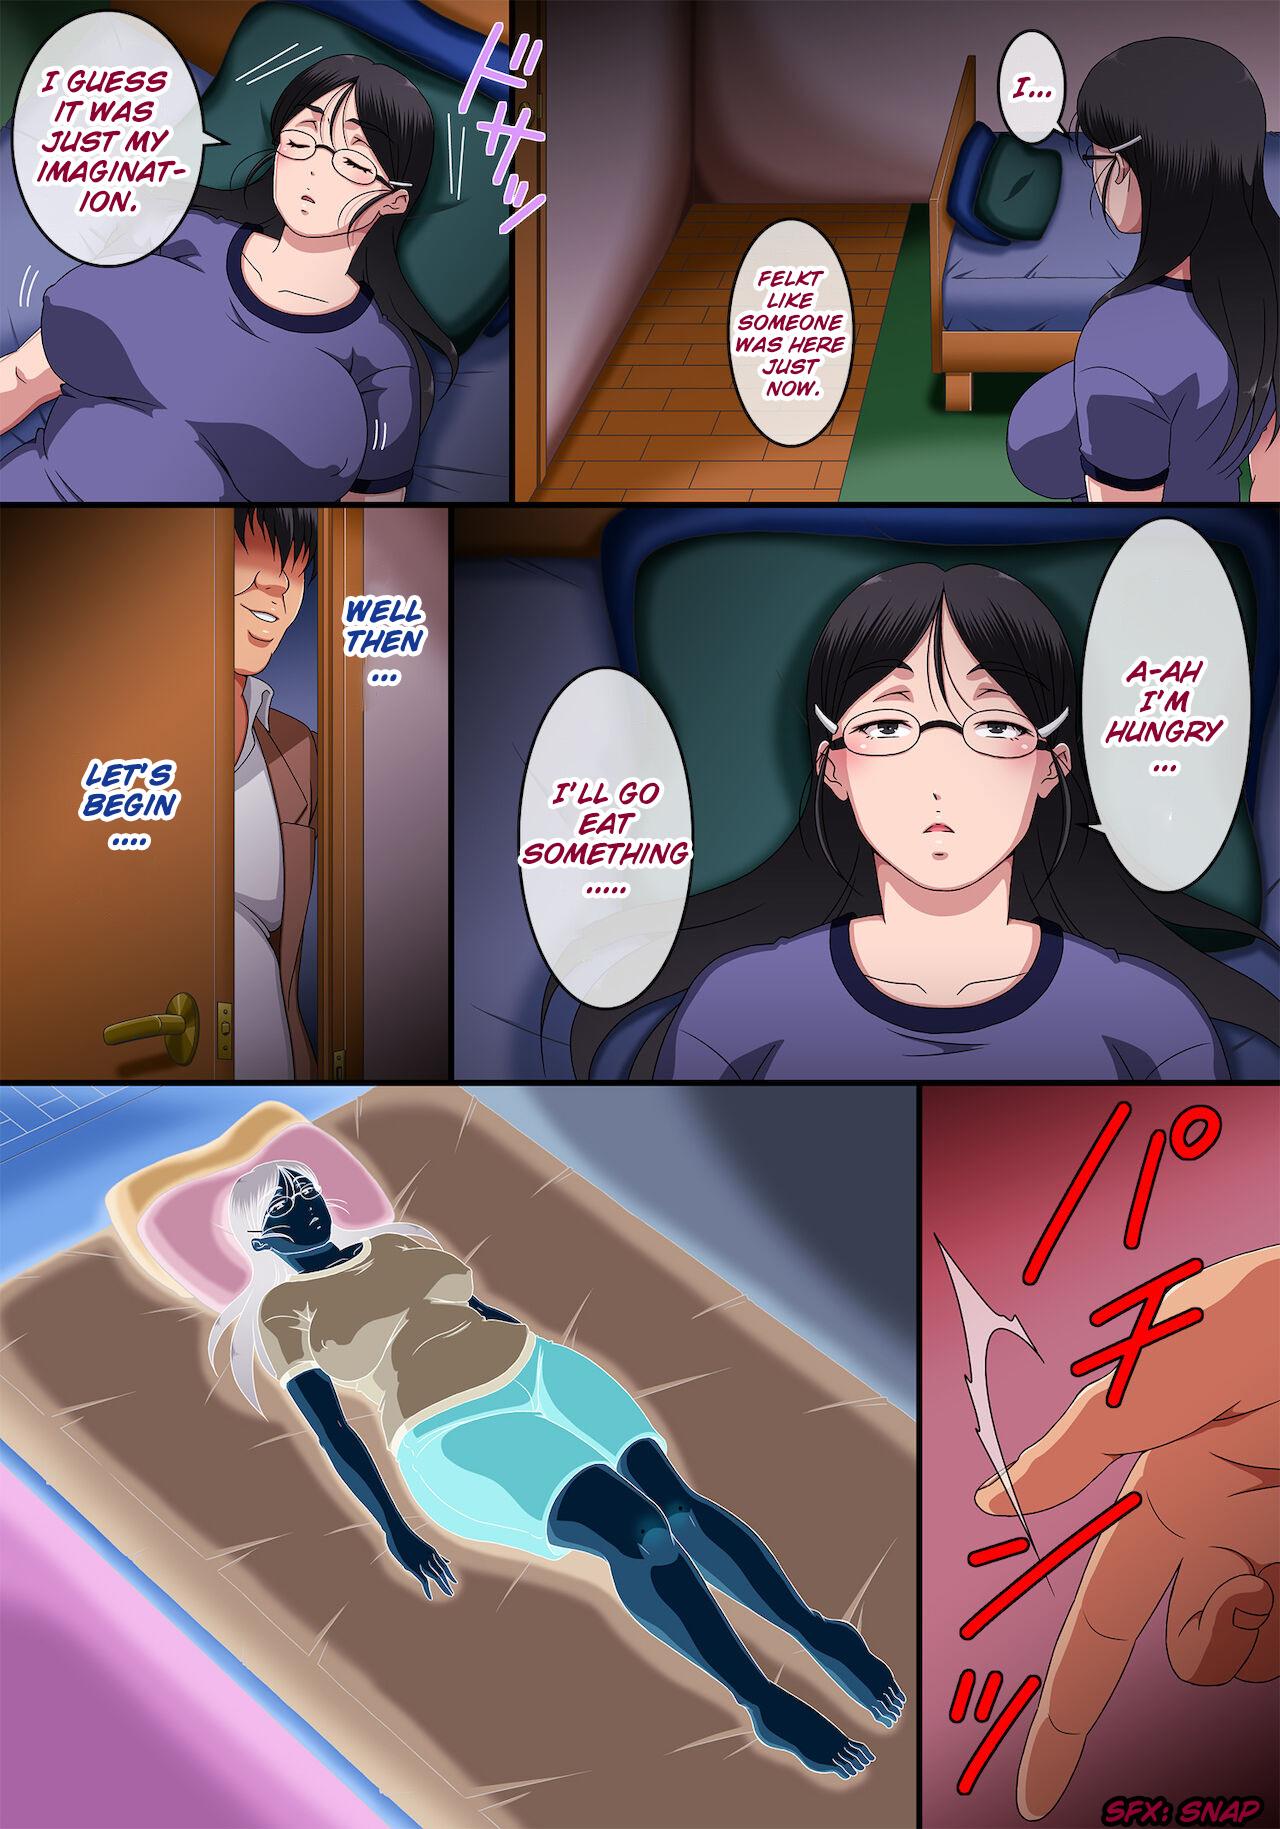 Tiny Something unbelievable happened when I stopped time for 1 month and violated a 42 year old hikikomori woman - Original Lesbian Sex - Page 6